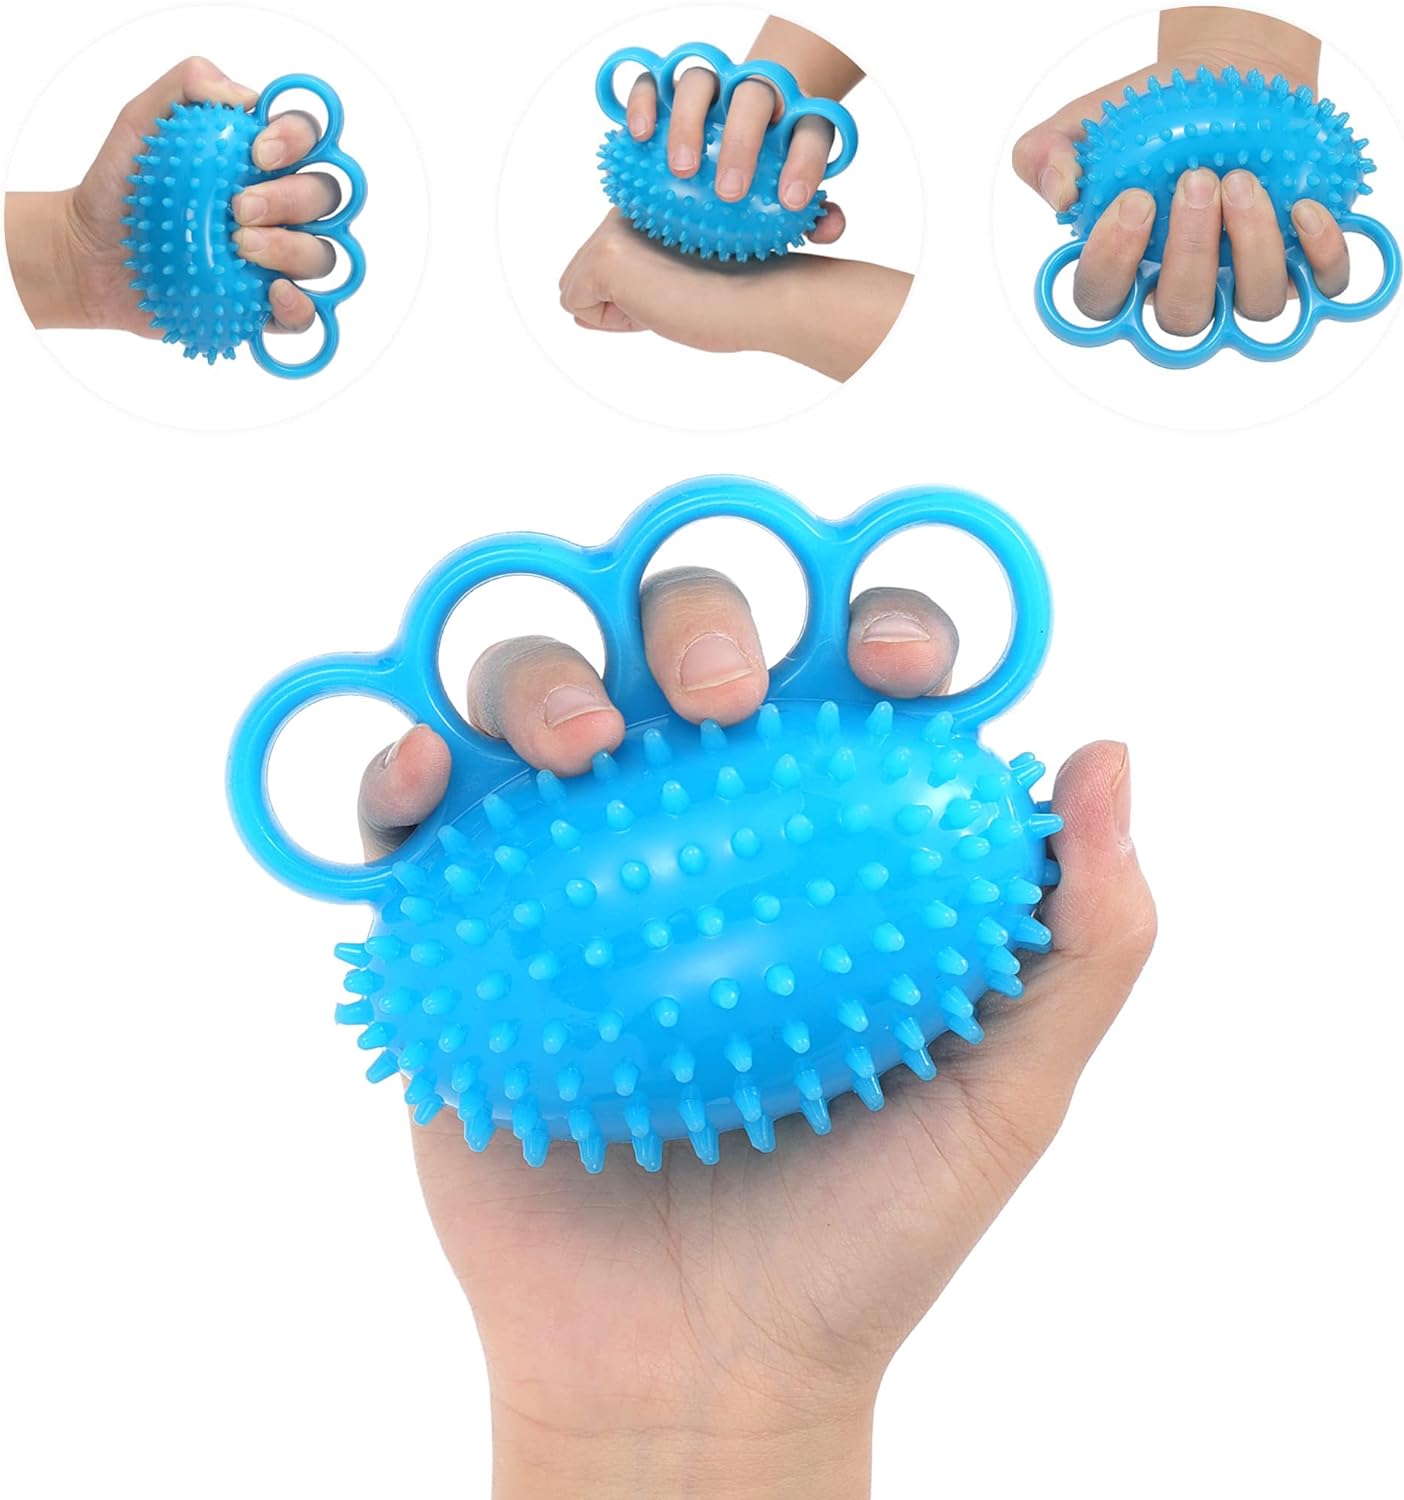 Arabest Hand Grip Strengthener, Finger Exerciser Ball and Hand Exercisers for Strength, Grip Strengthening, Improve Flexibility, Hand Therapy Ball for Hand Cramps and Recovery